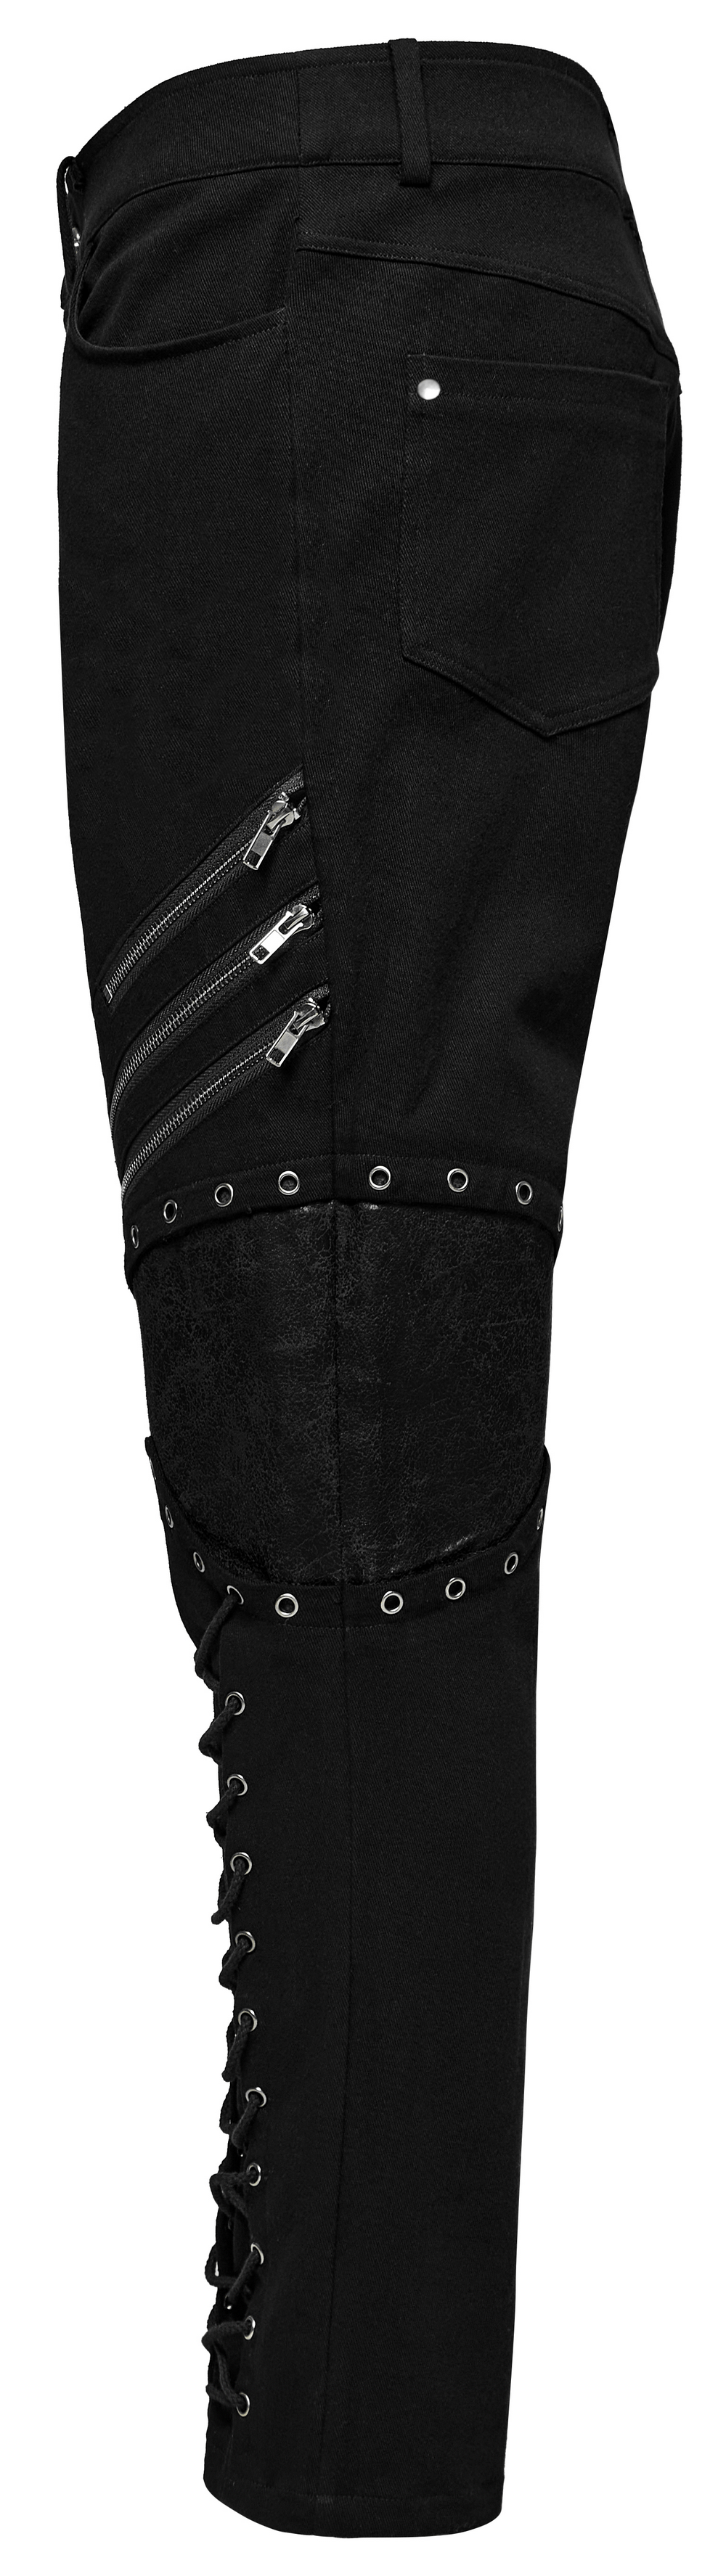 Punk Men's Black Twill Pants with Zippers and Eyelets